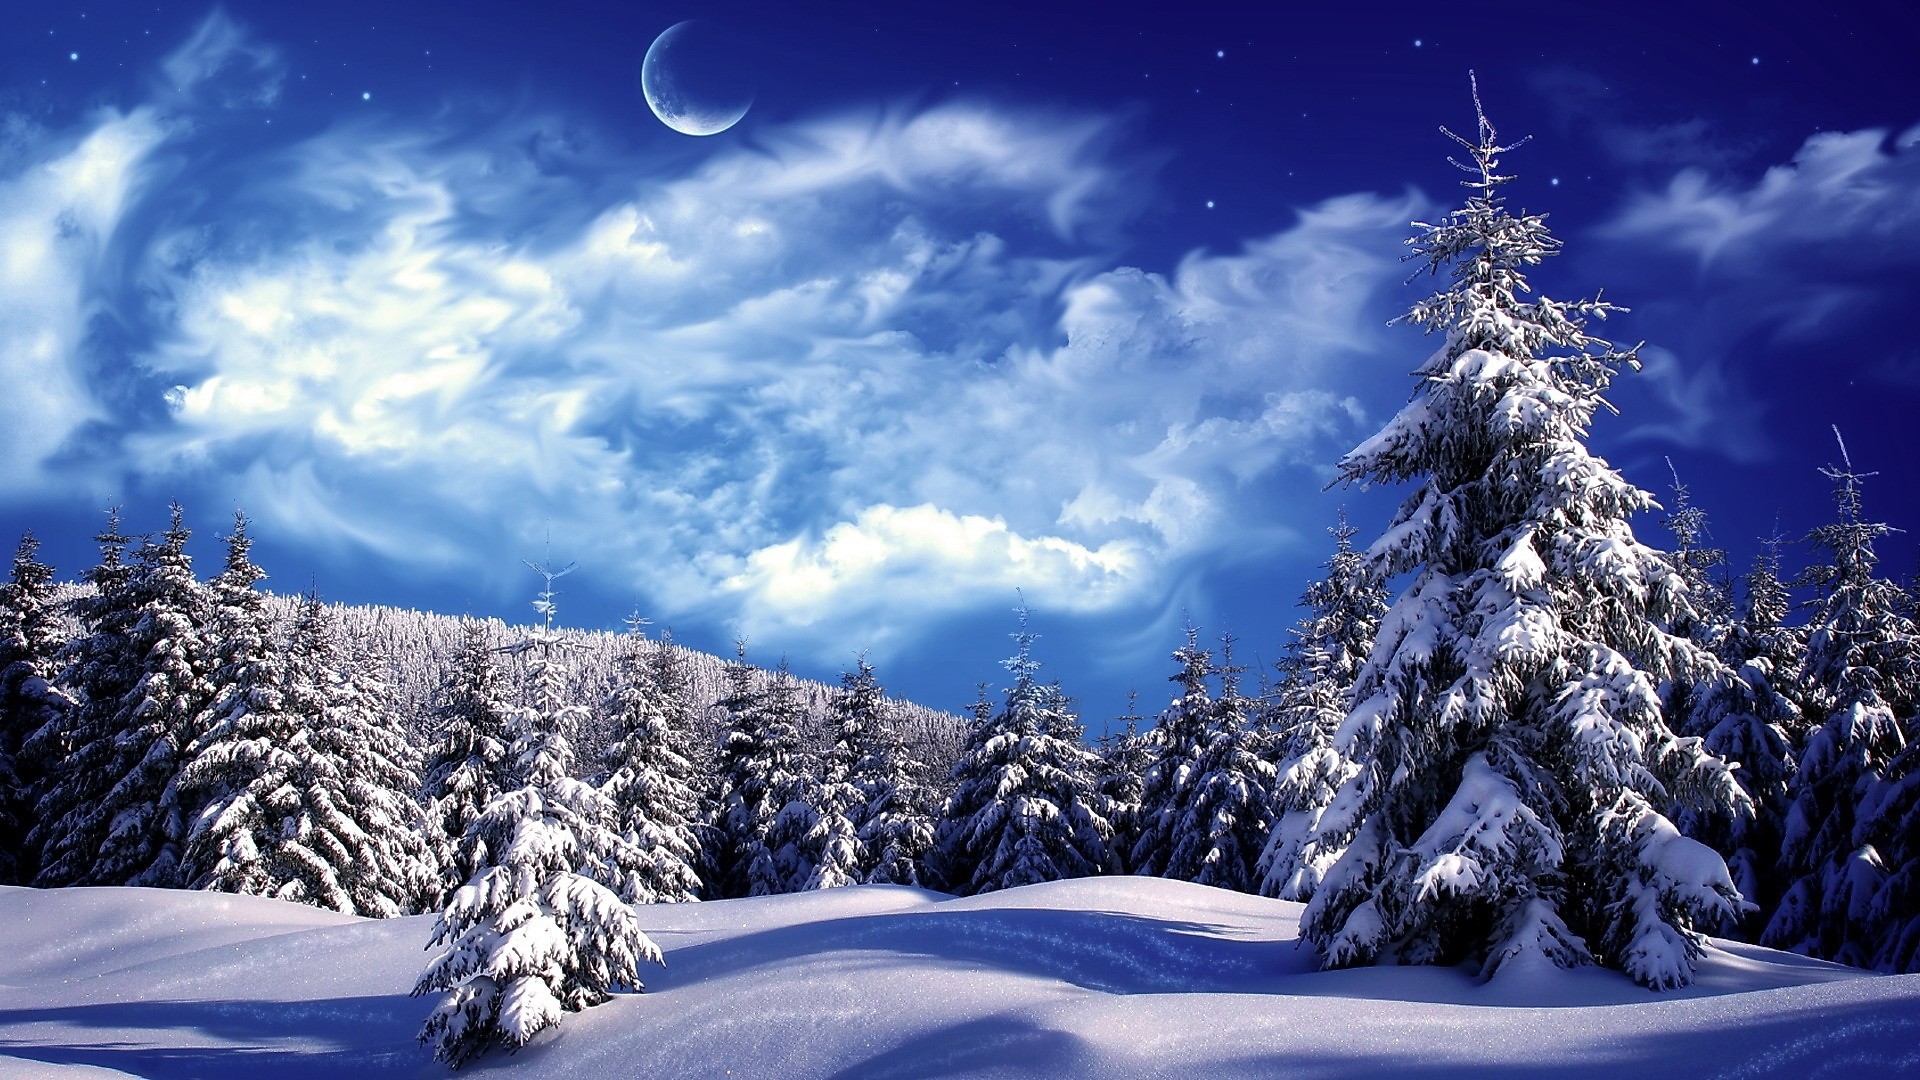 Snowy Wallpaper for pc